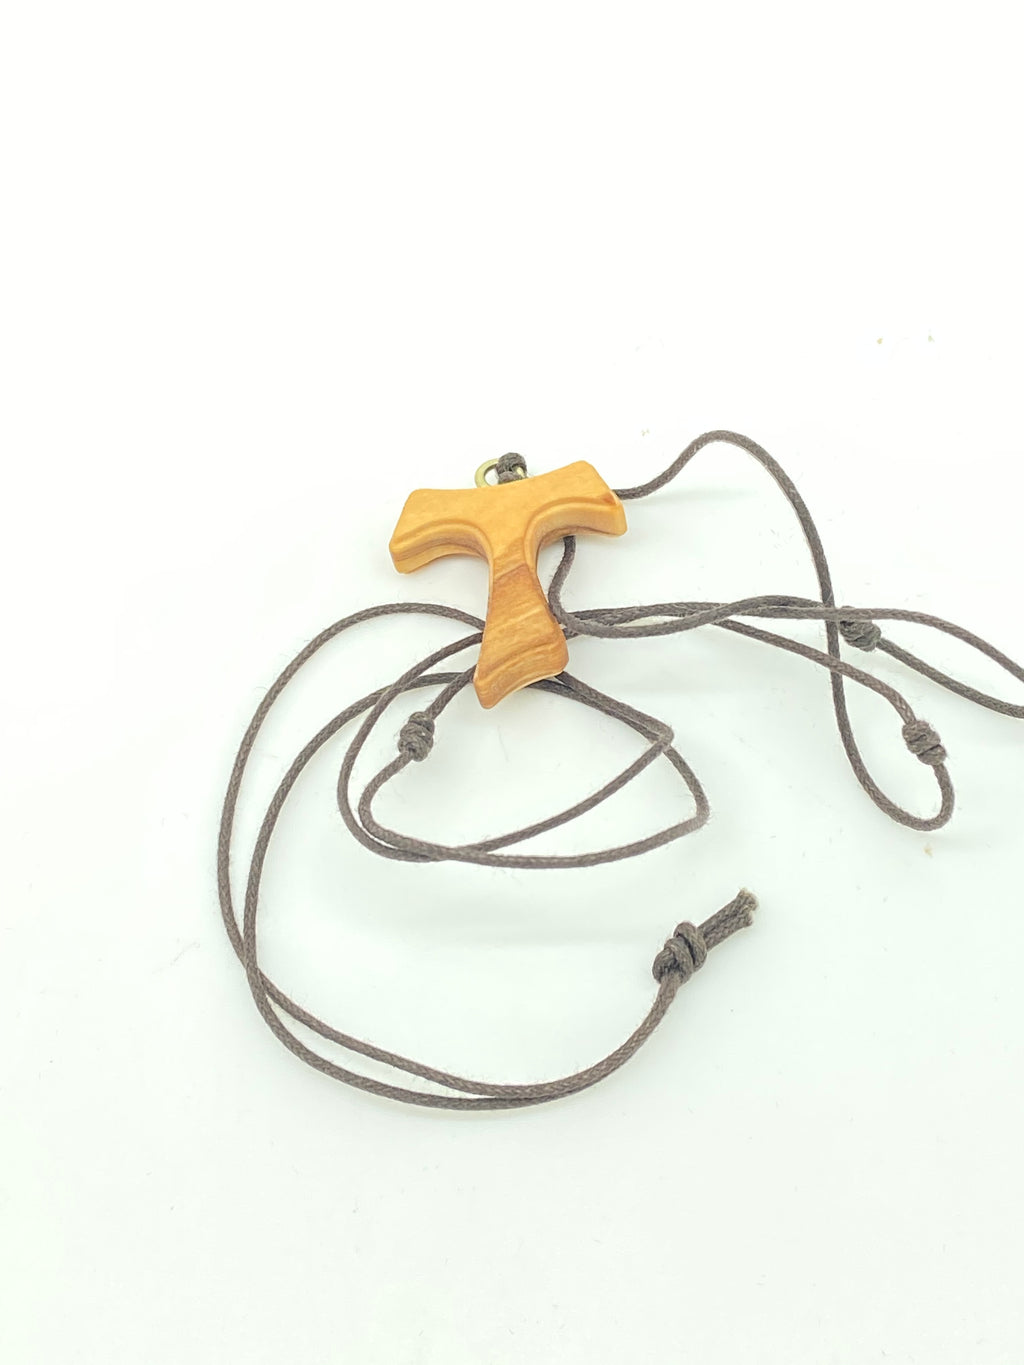 1" Olivewood Tau Cross on Brown Cord - Unique Catholic Gifts